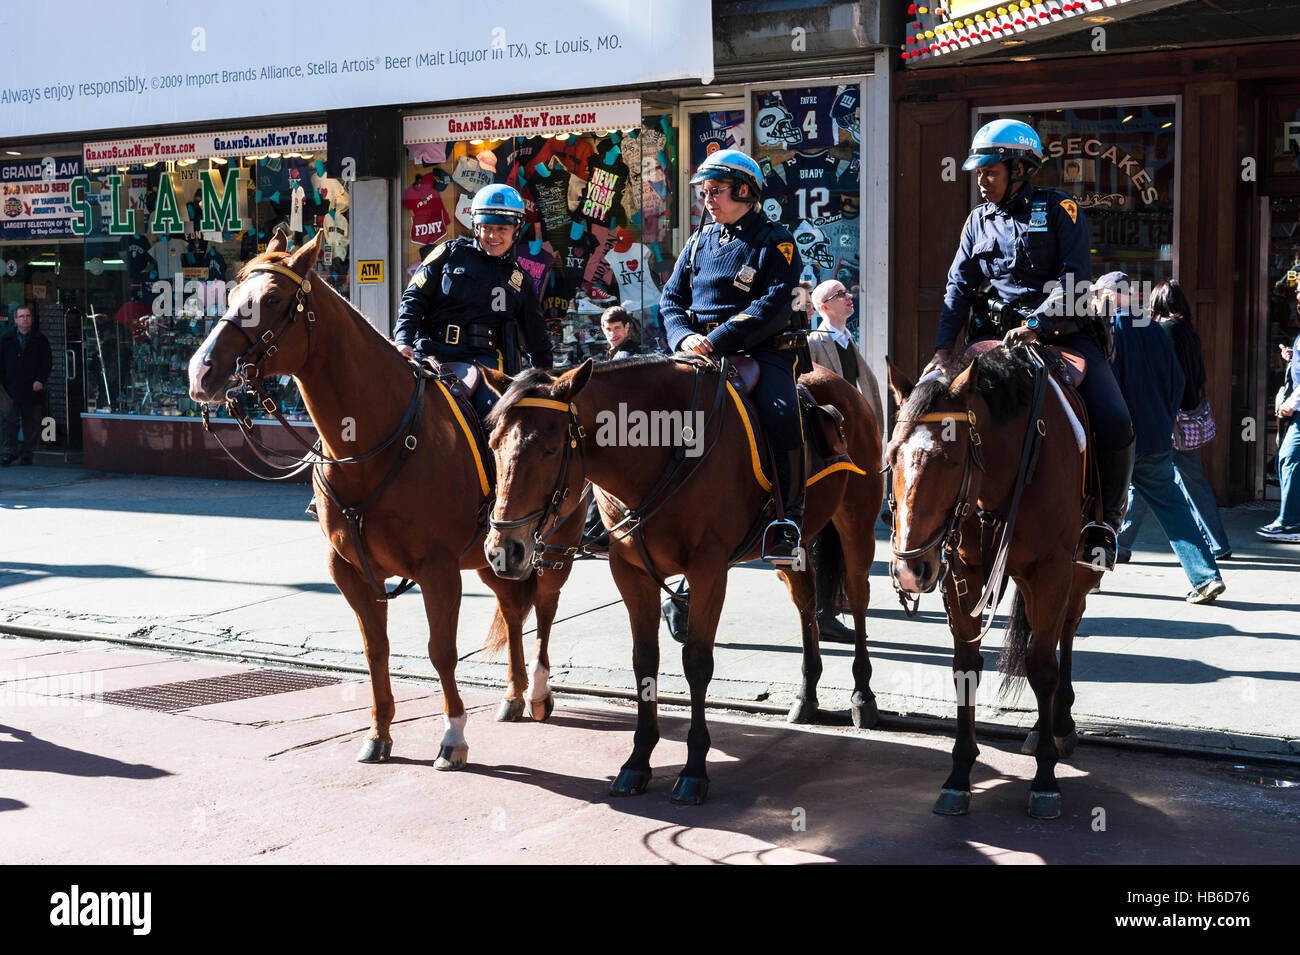 Three female police officers on horses patrol Times Square in Manhattan, New York City, during the day Stock Photo